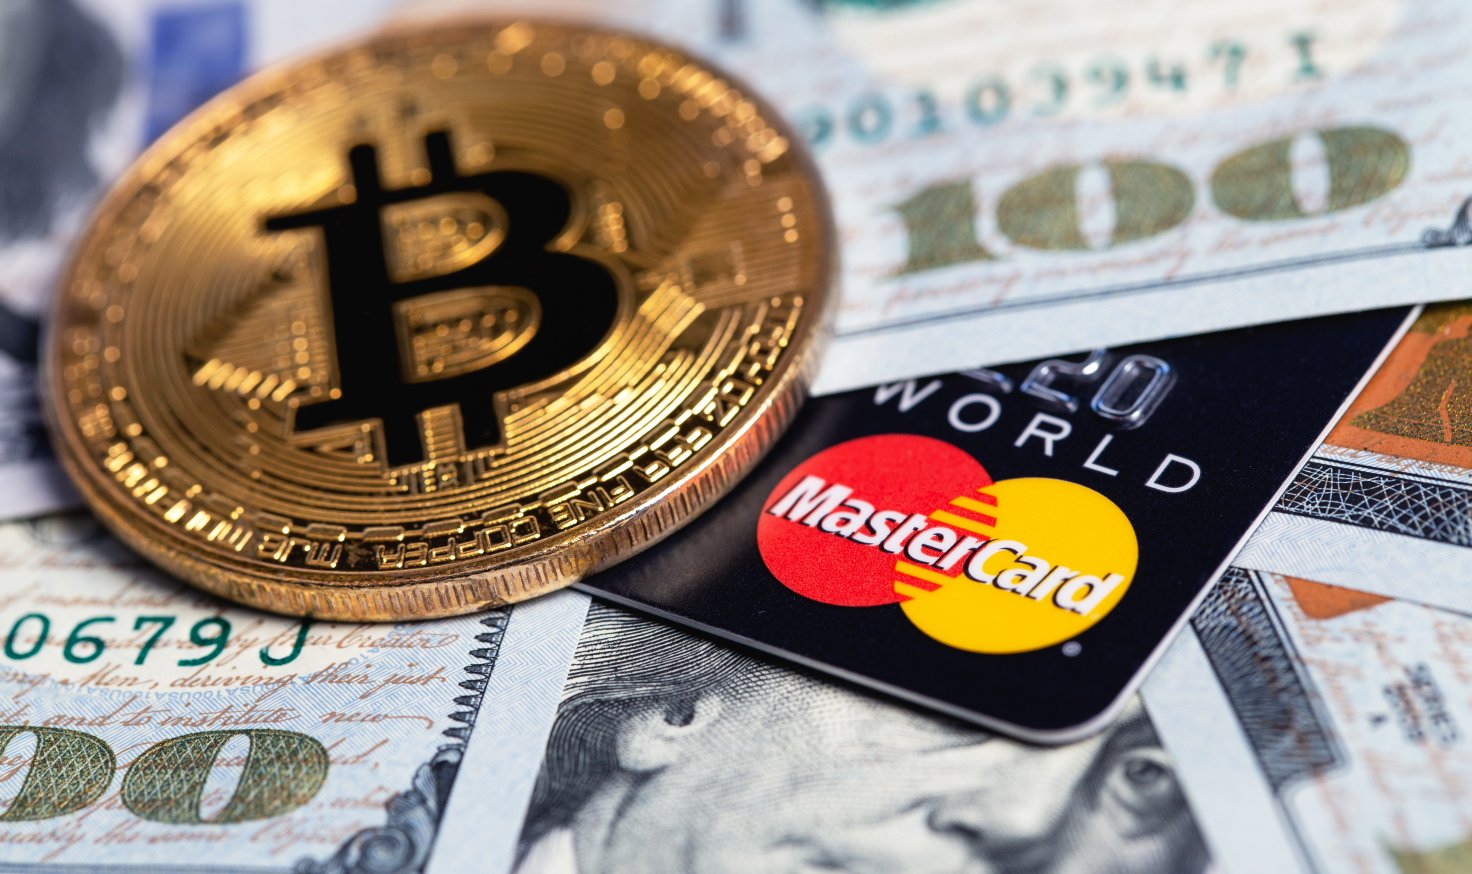 Mastercard unveils ‘Crypto Secure’ a fraud prevention solution on cryptocurrency exchange